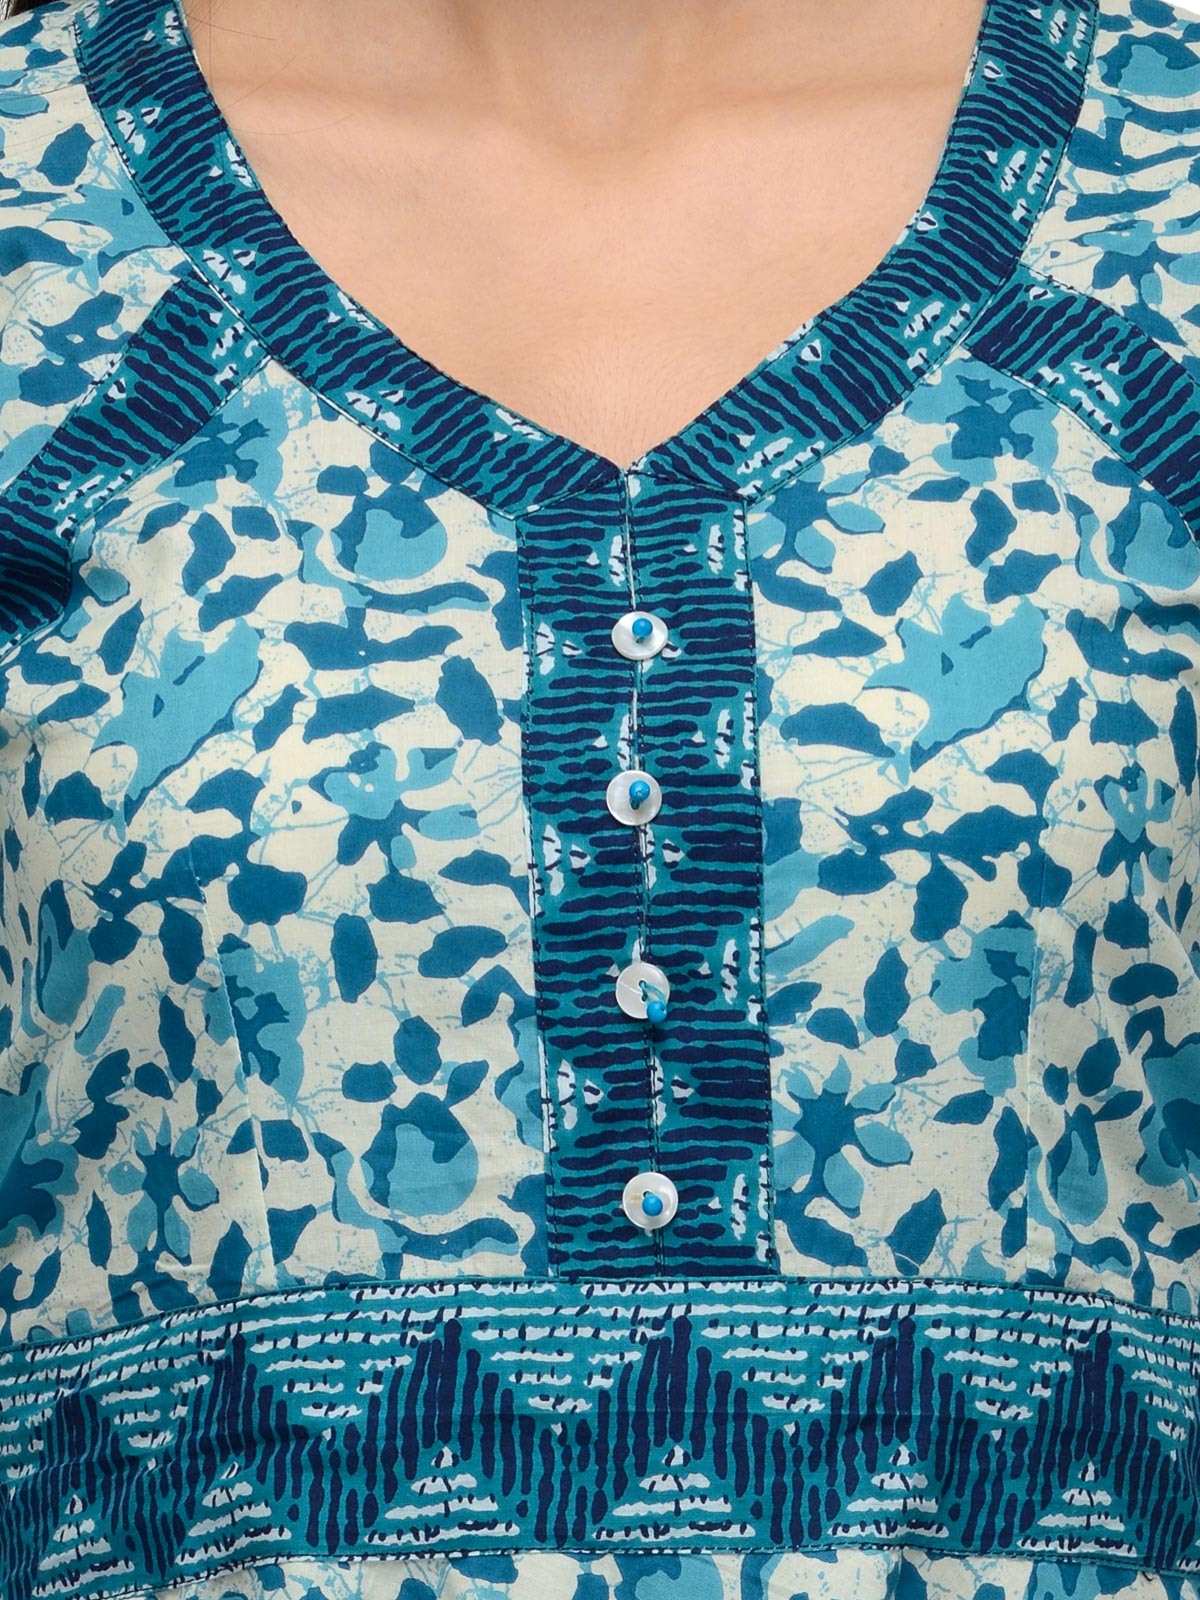 Women's blue dress in printed cotton UD6005